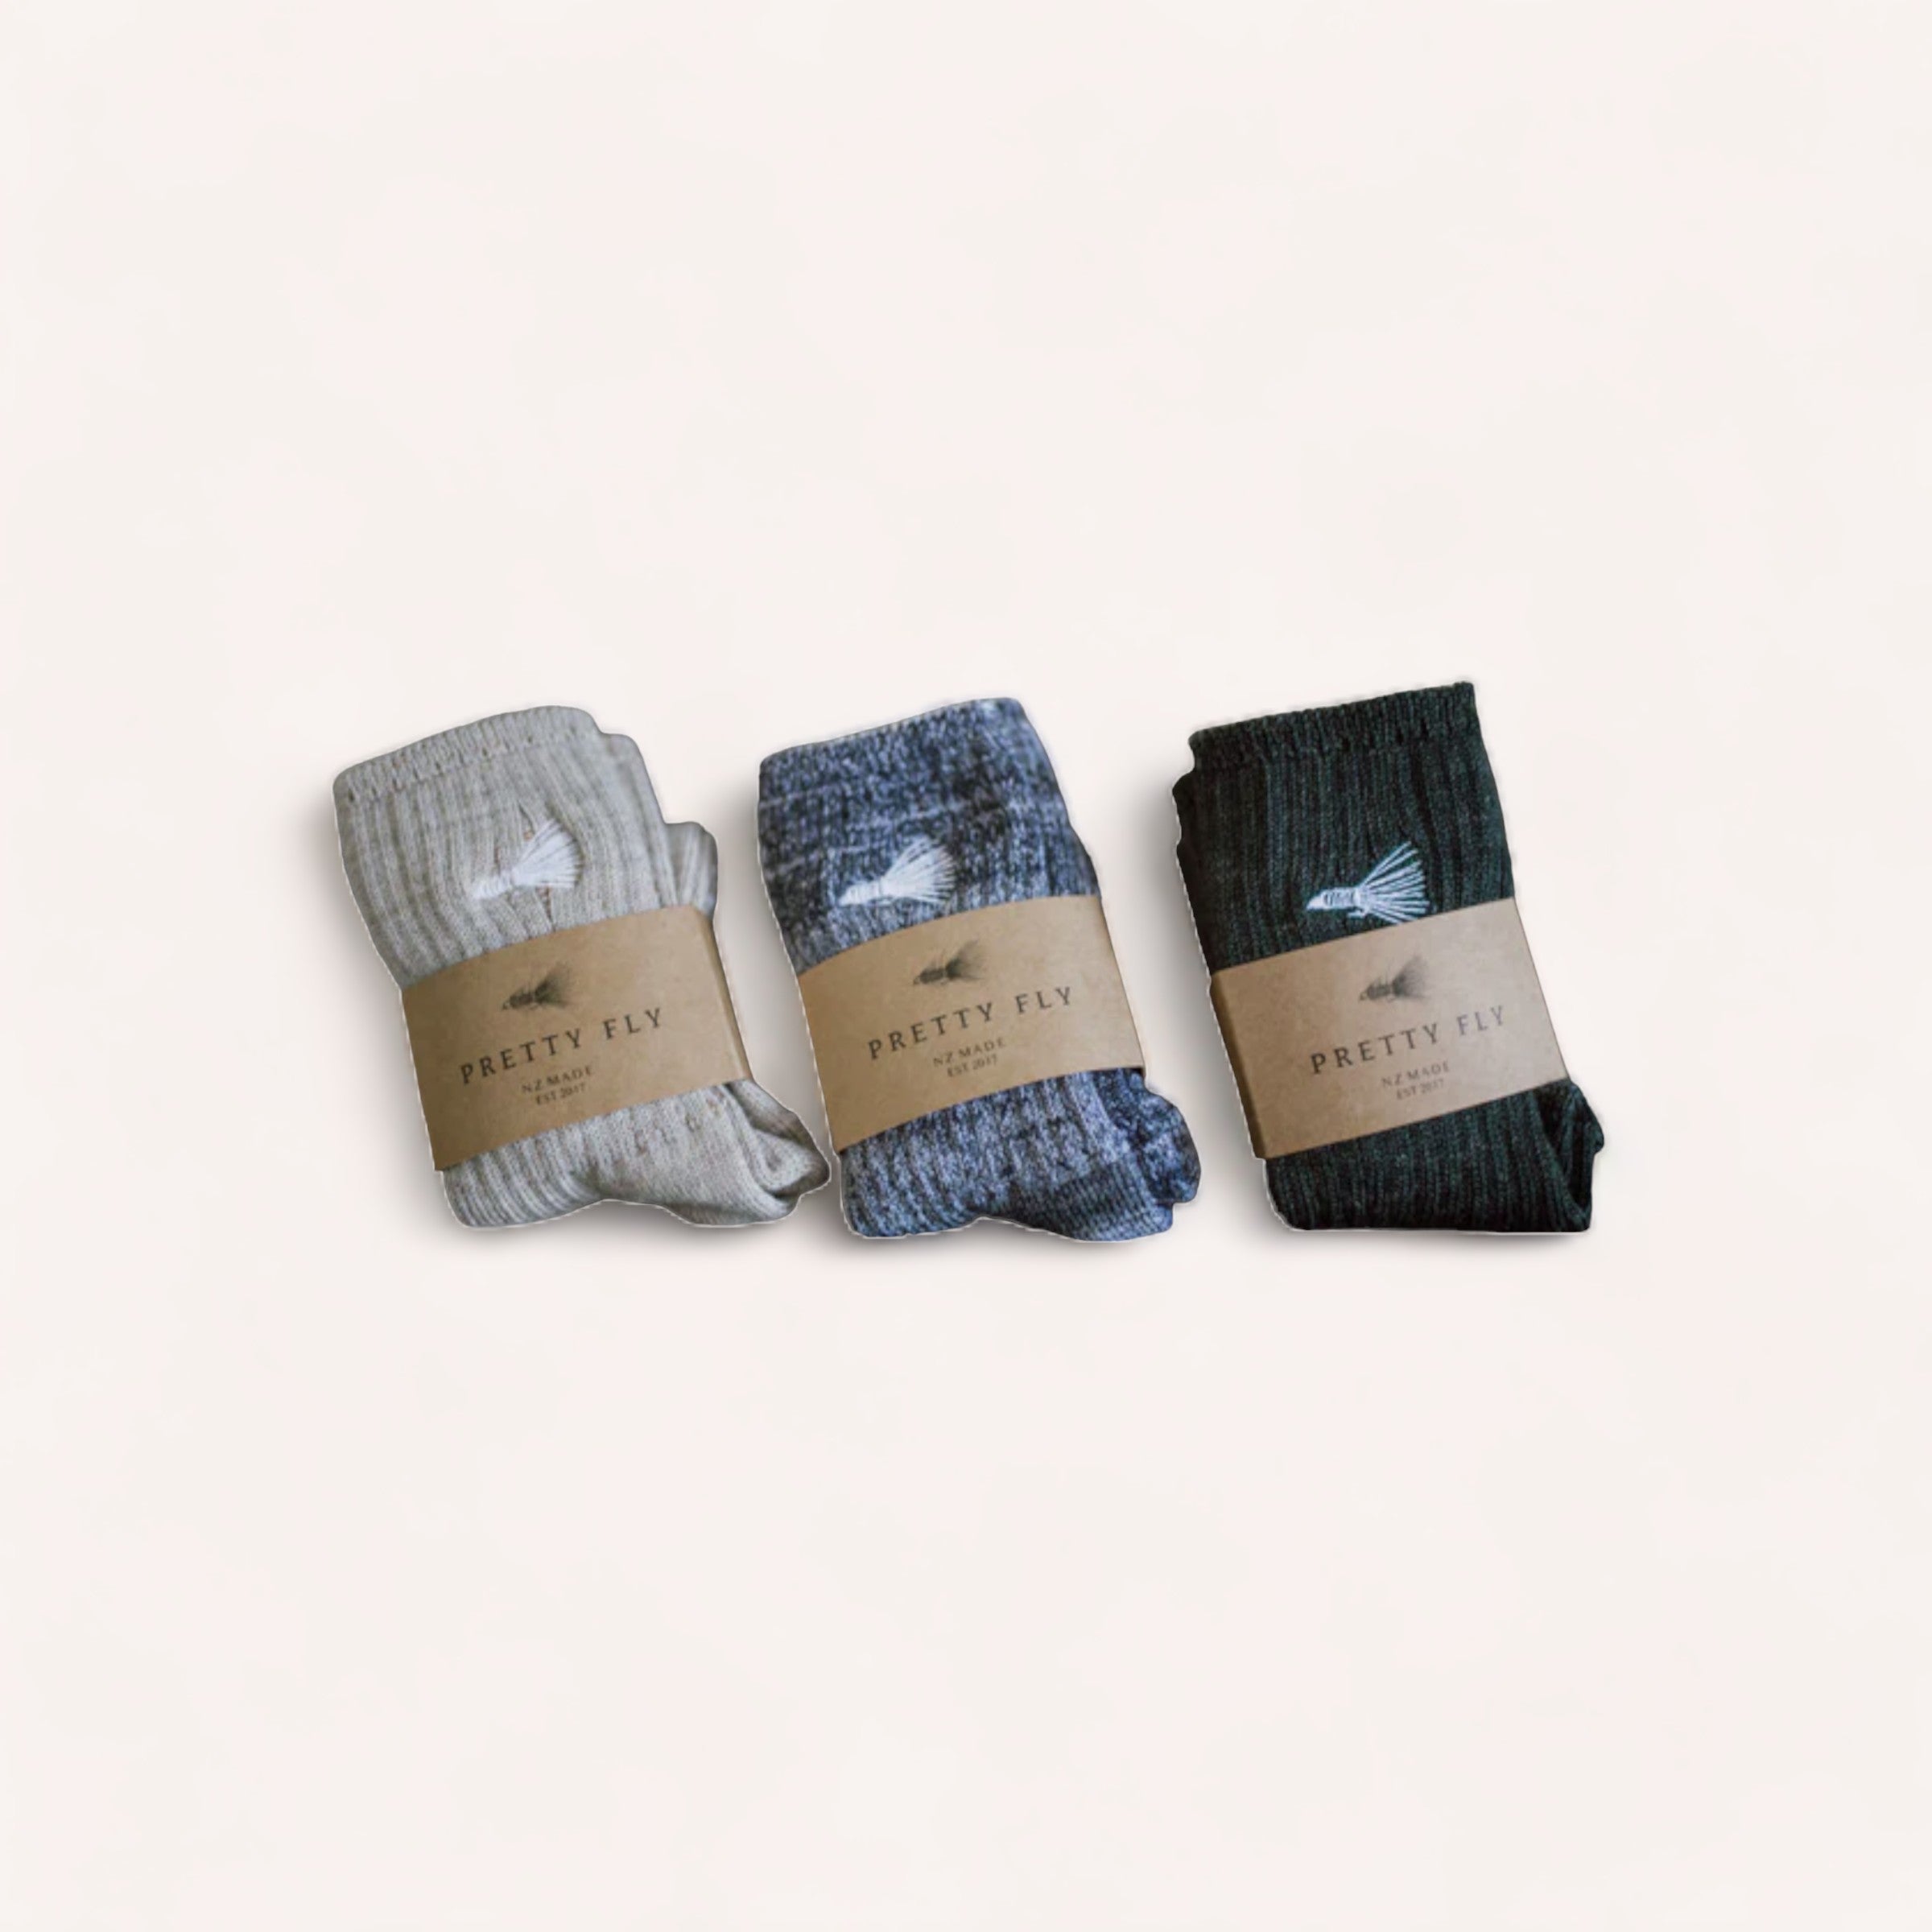 Three pairs of neatly folded Marino Wool Socks by Pretty Fly in varying shades of gray and blue, each with a label reading "pretty fly," presented against a clean, light background.